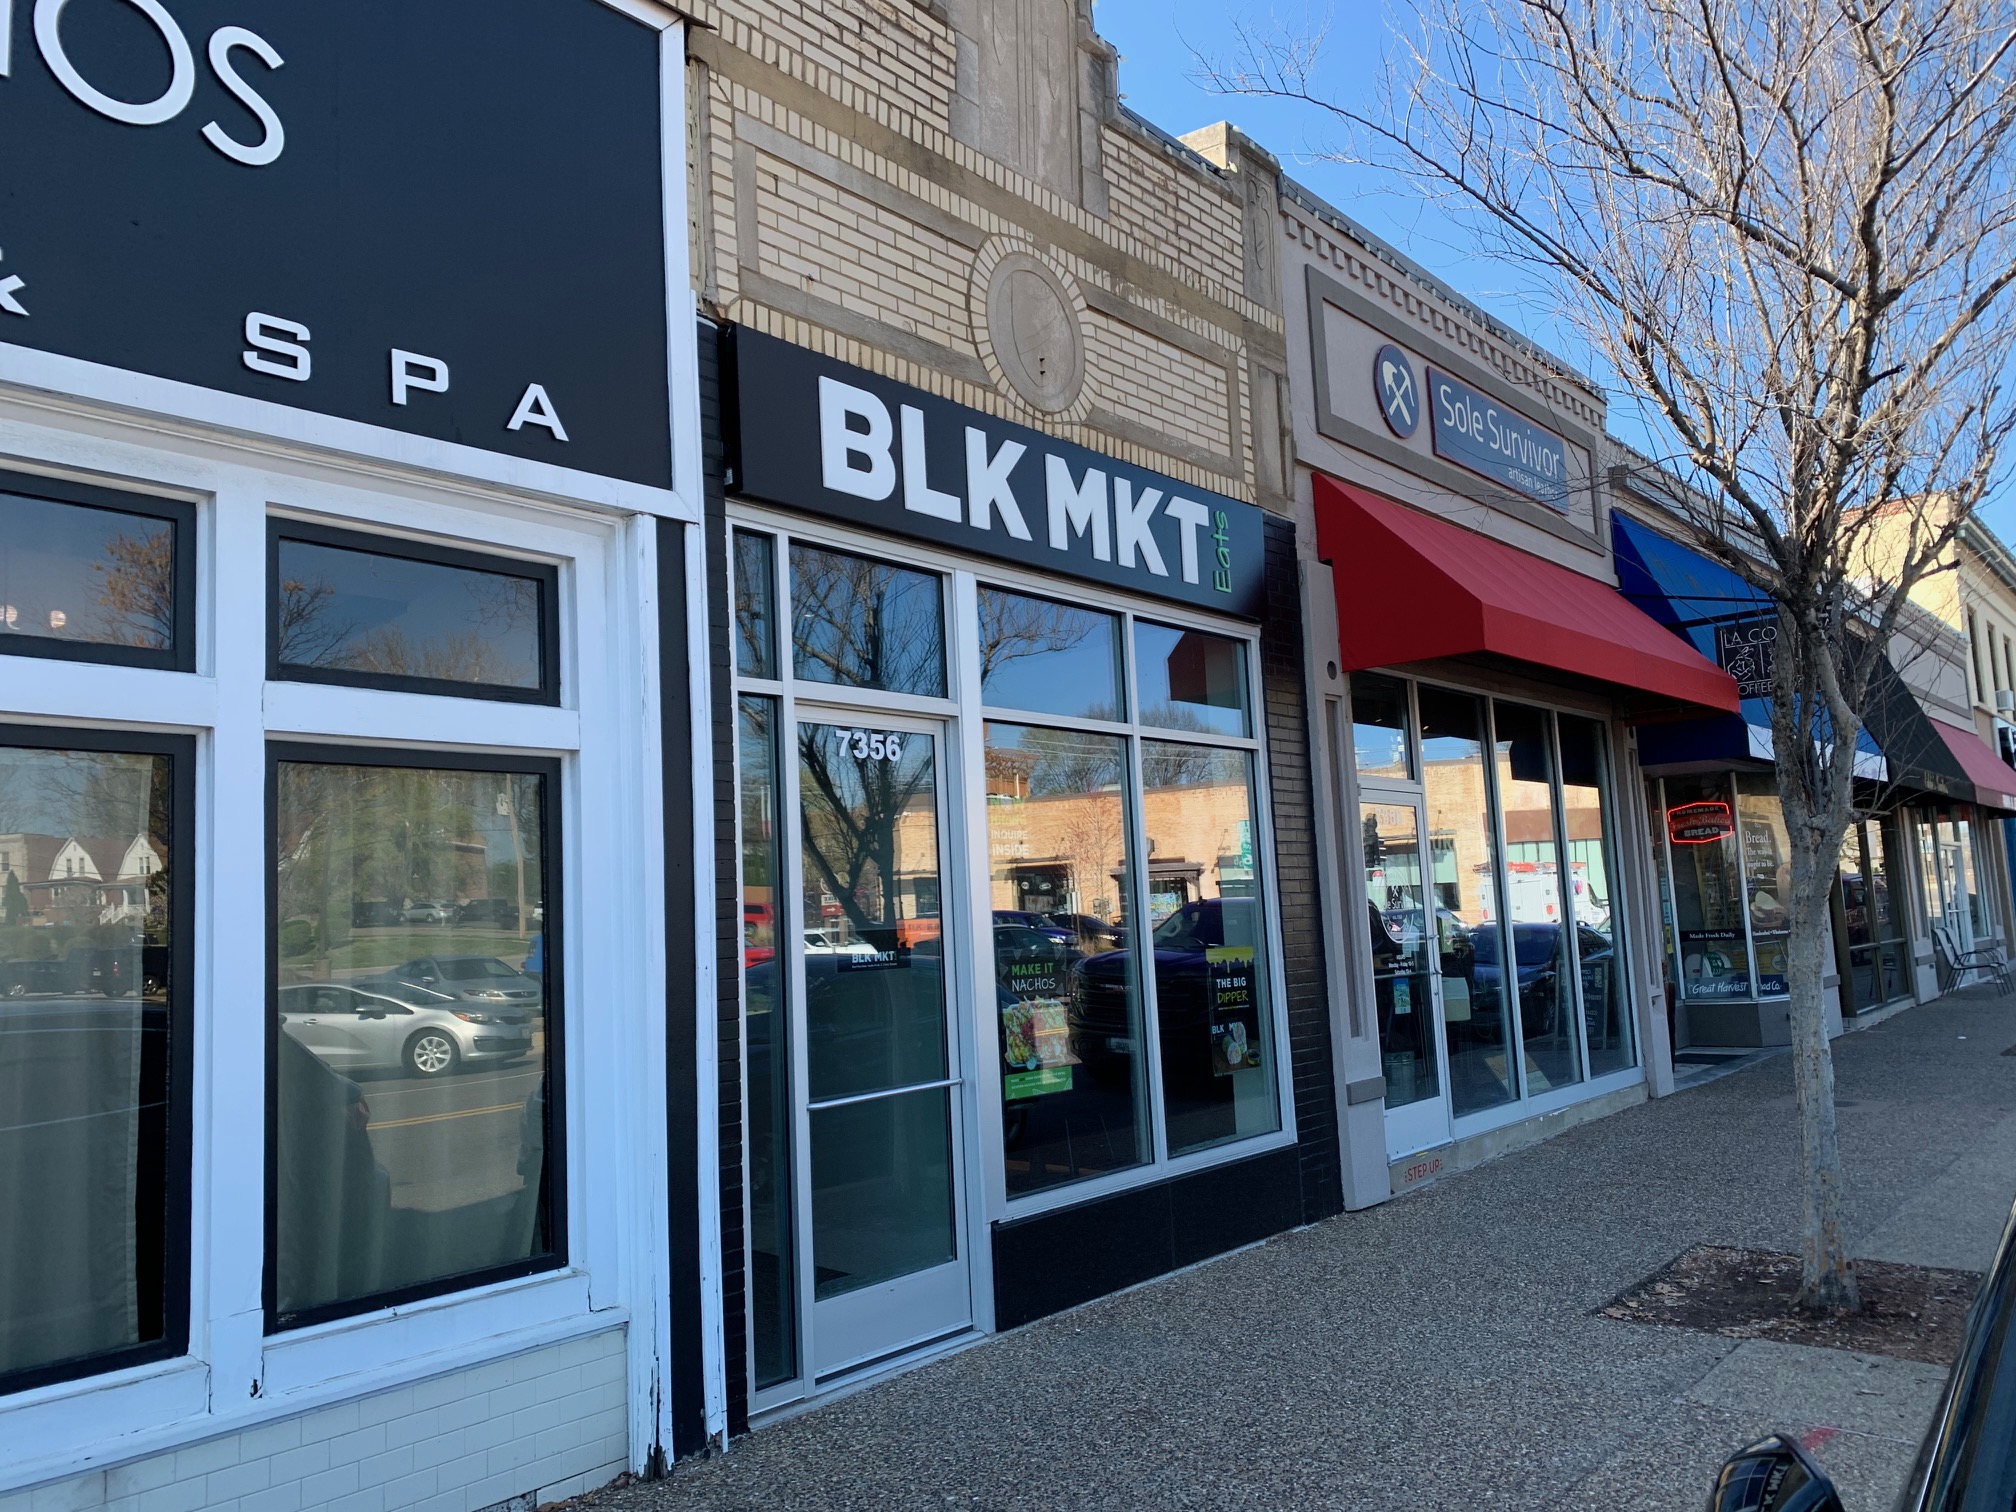 BLK MKT has opened in Maplewood, other restaurants in the news